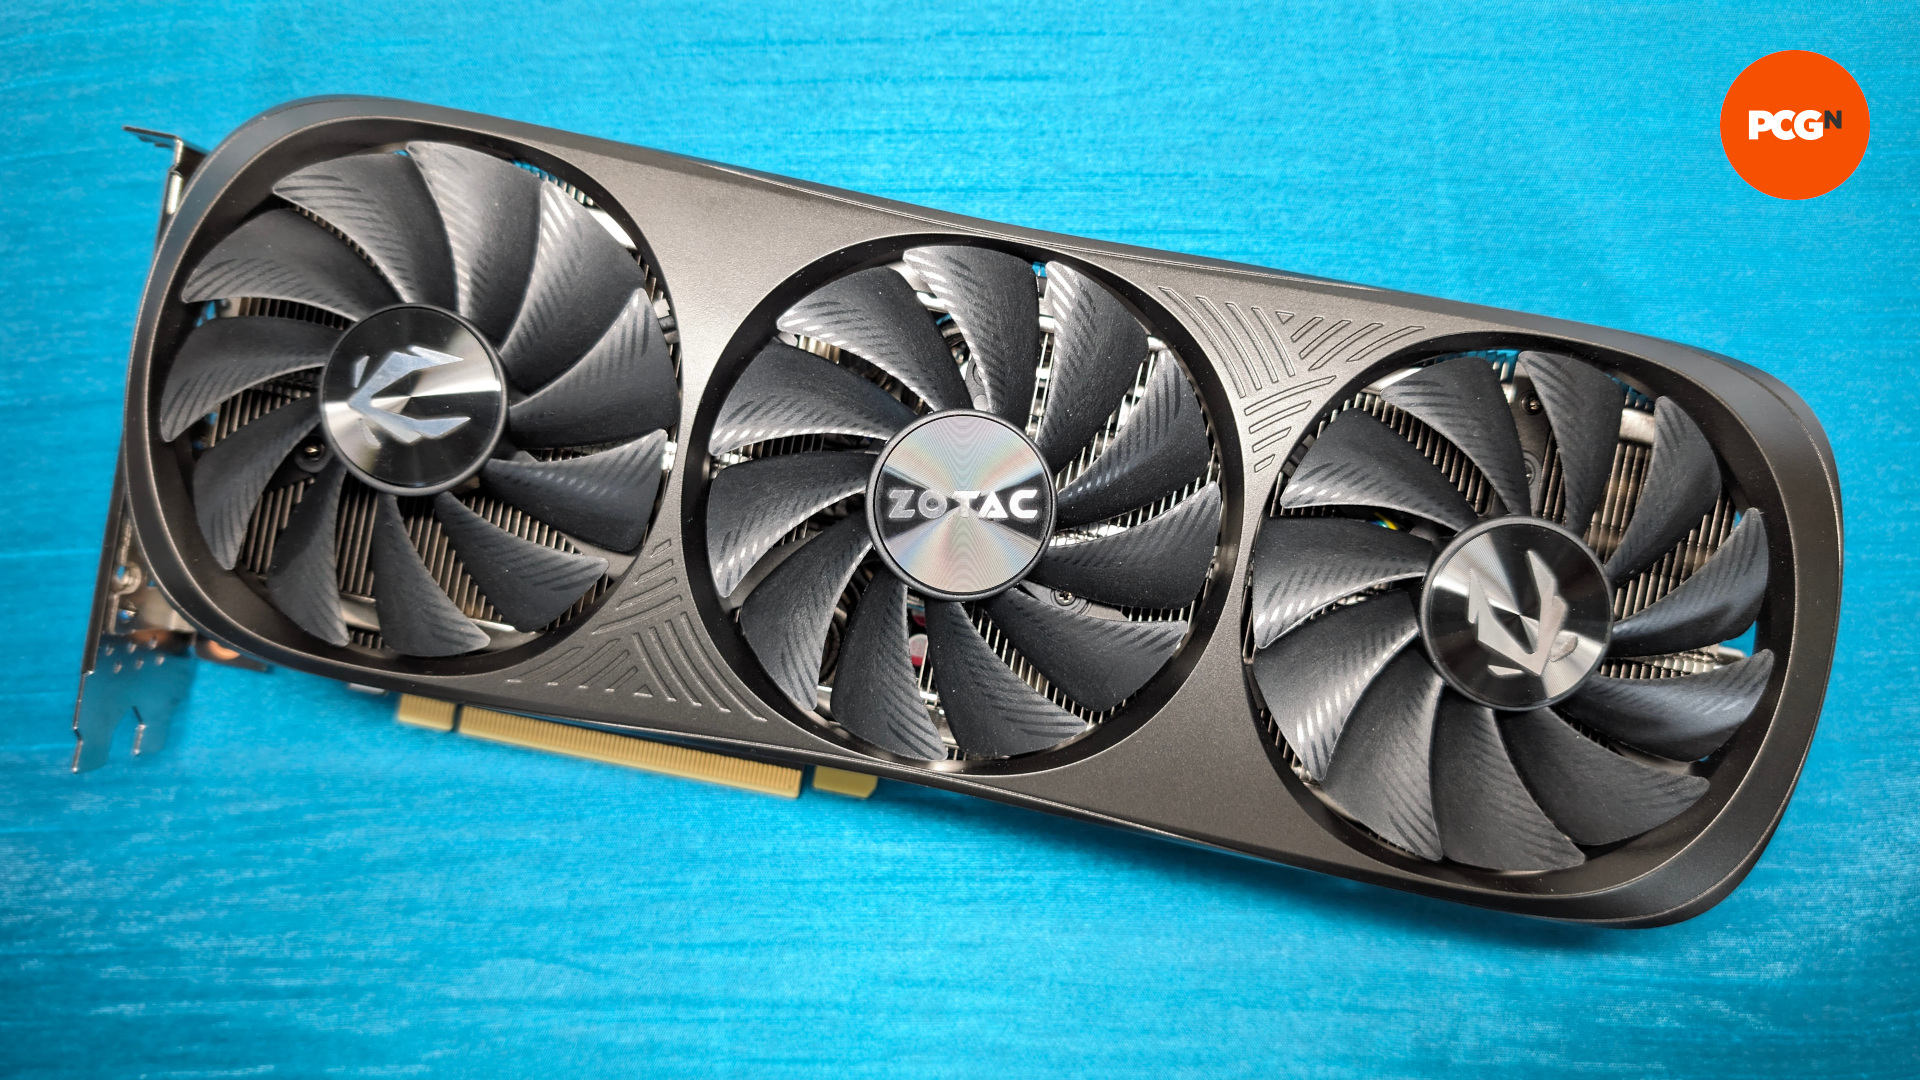 The Nvidia GeForce RTX 4070 Ti Super graphics card against a blue background